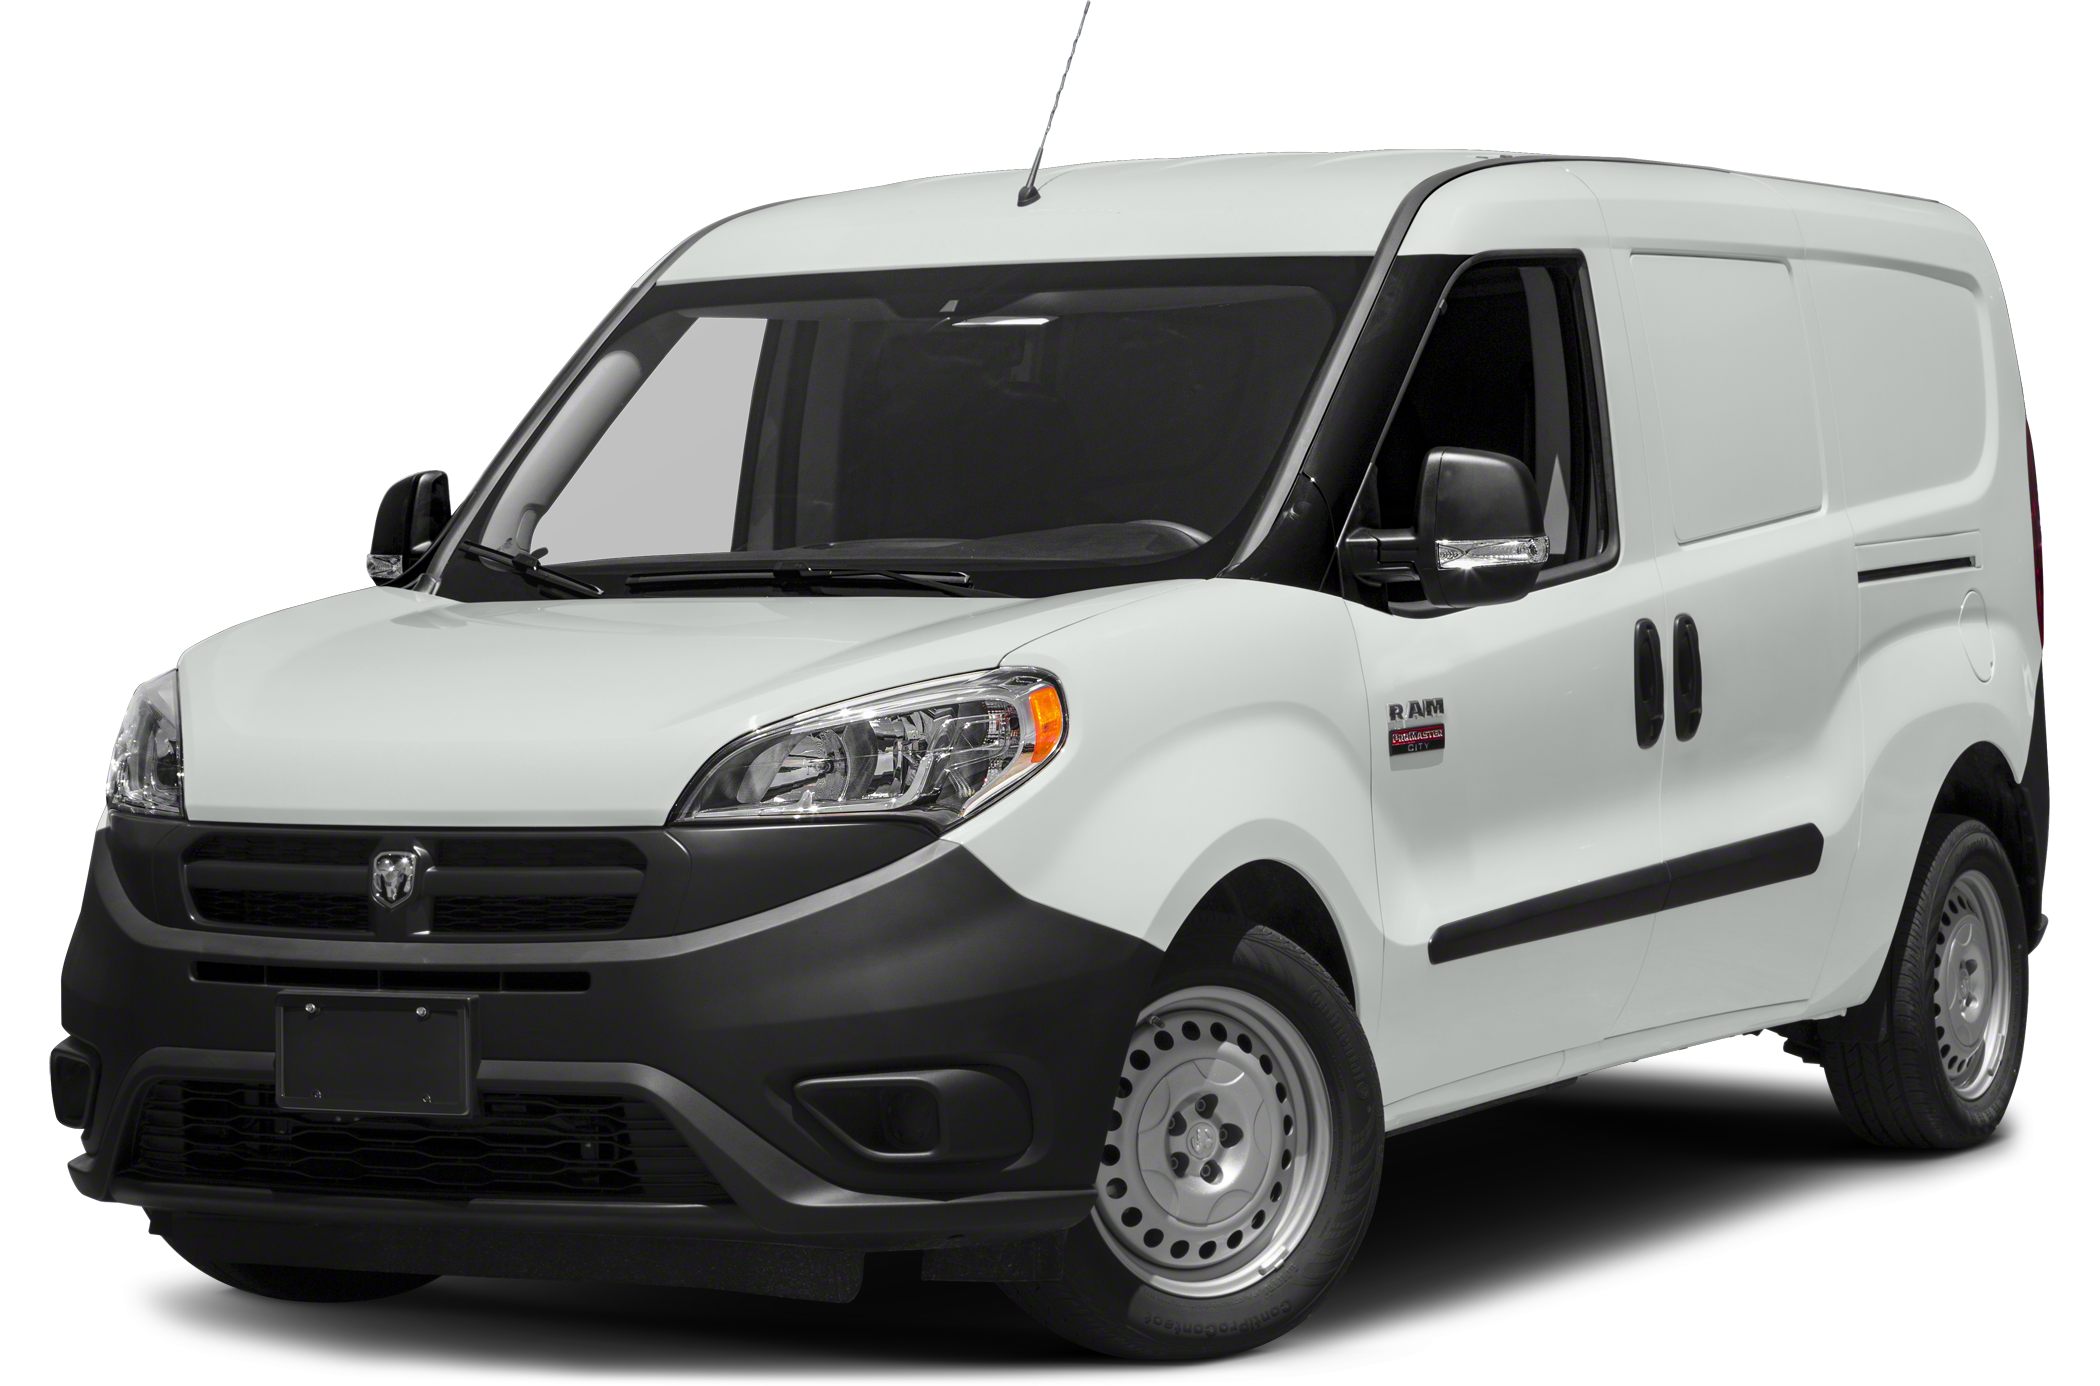 2015 Ram Promaster-City oem parts and accessories on sale